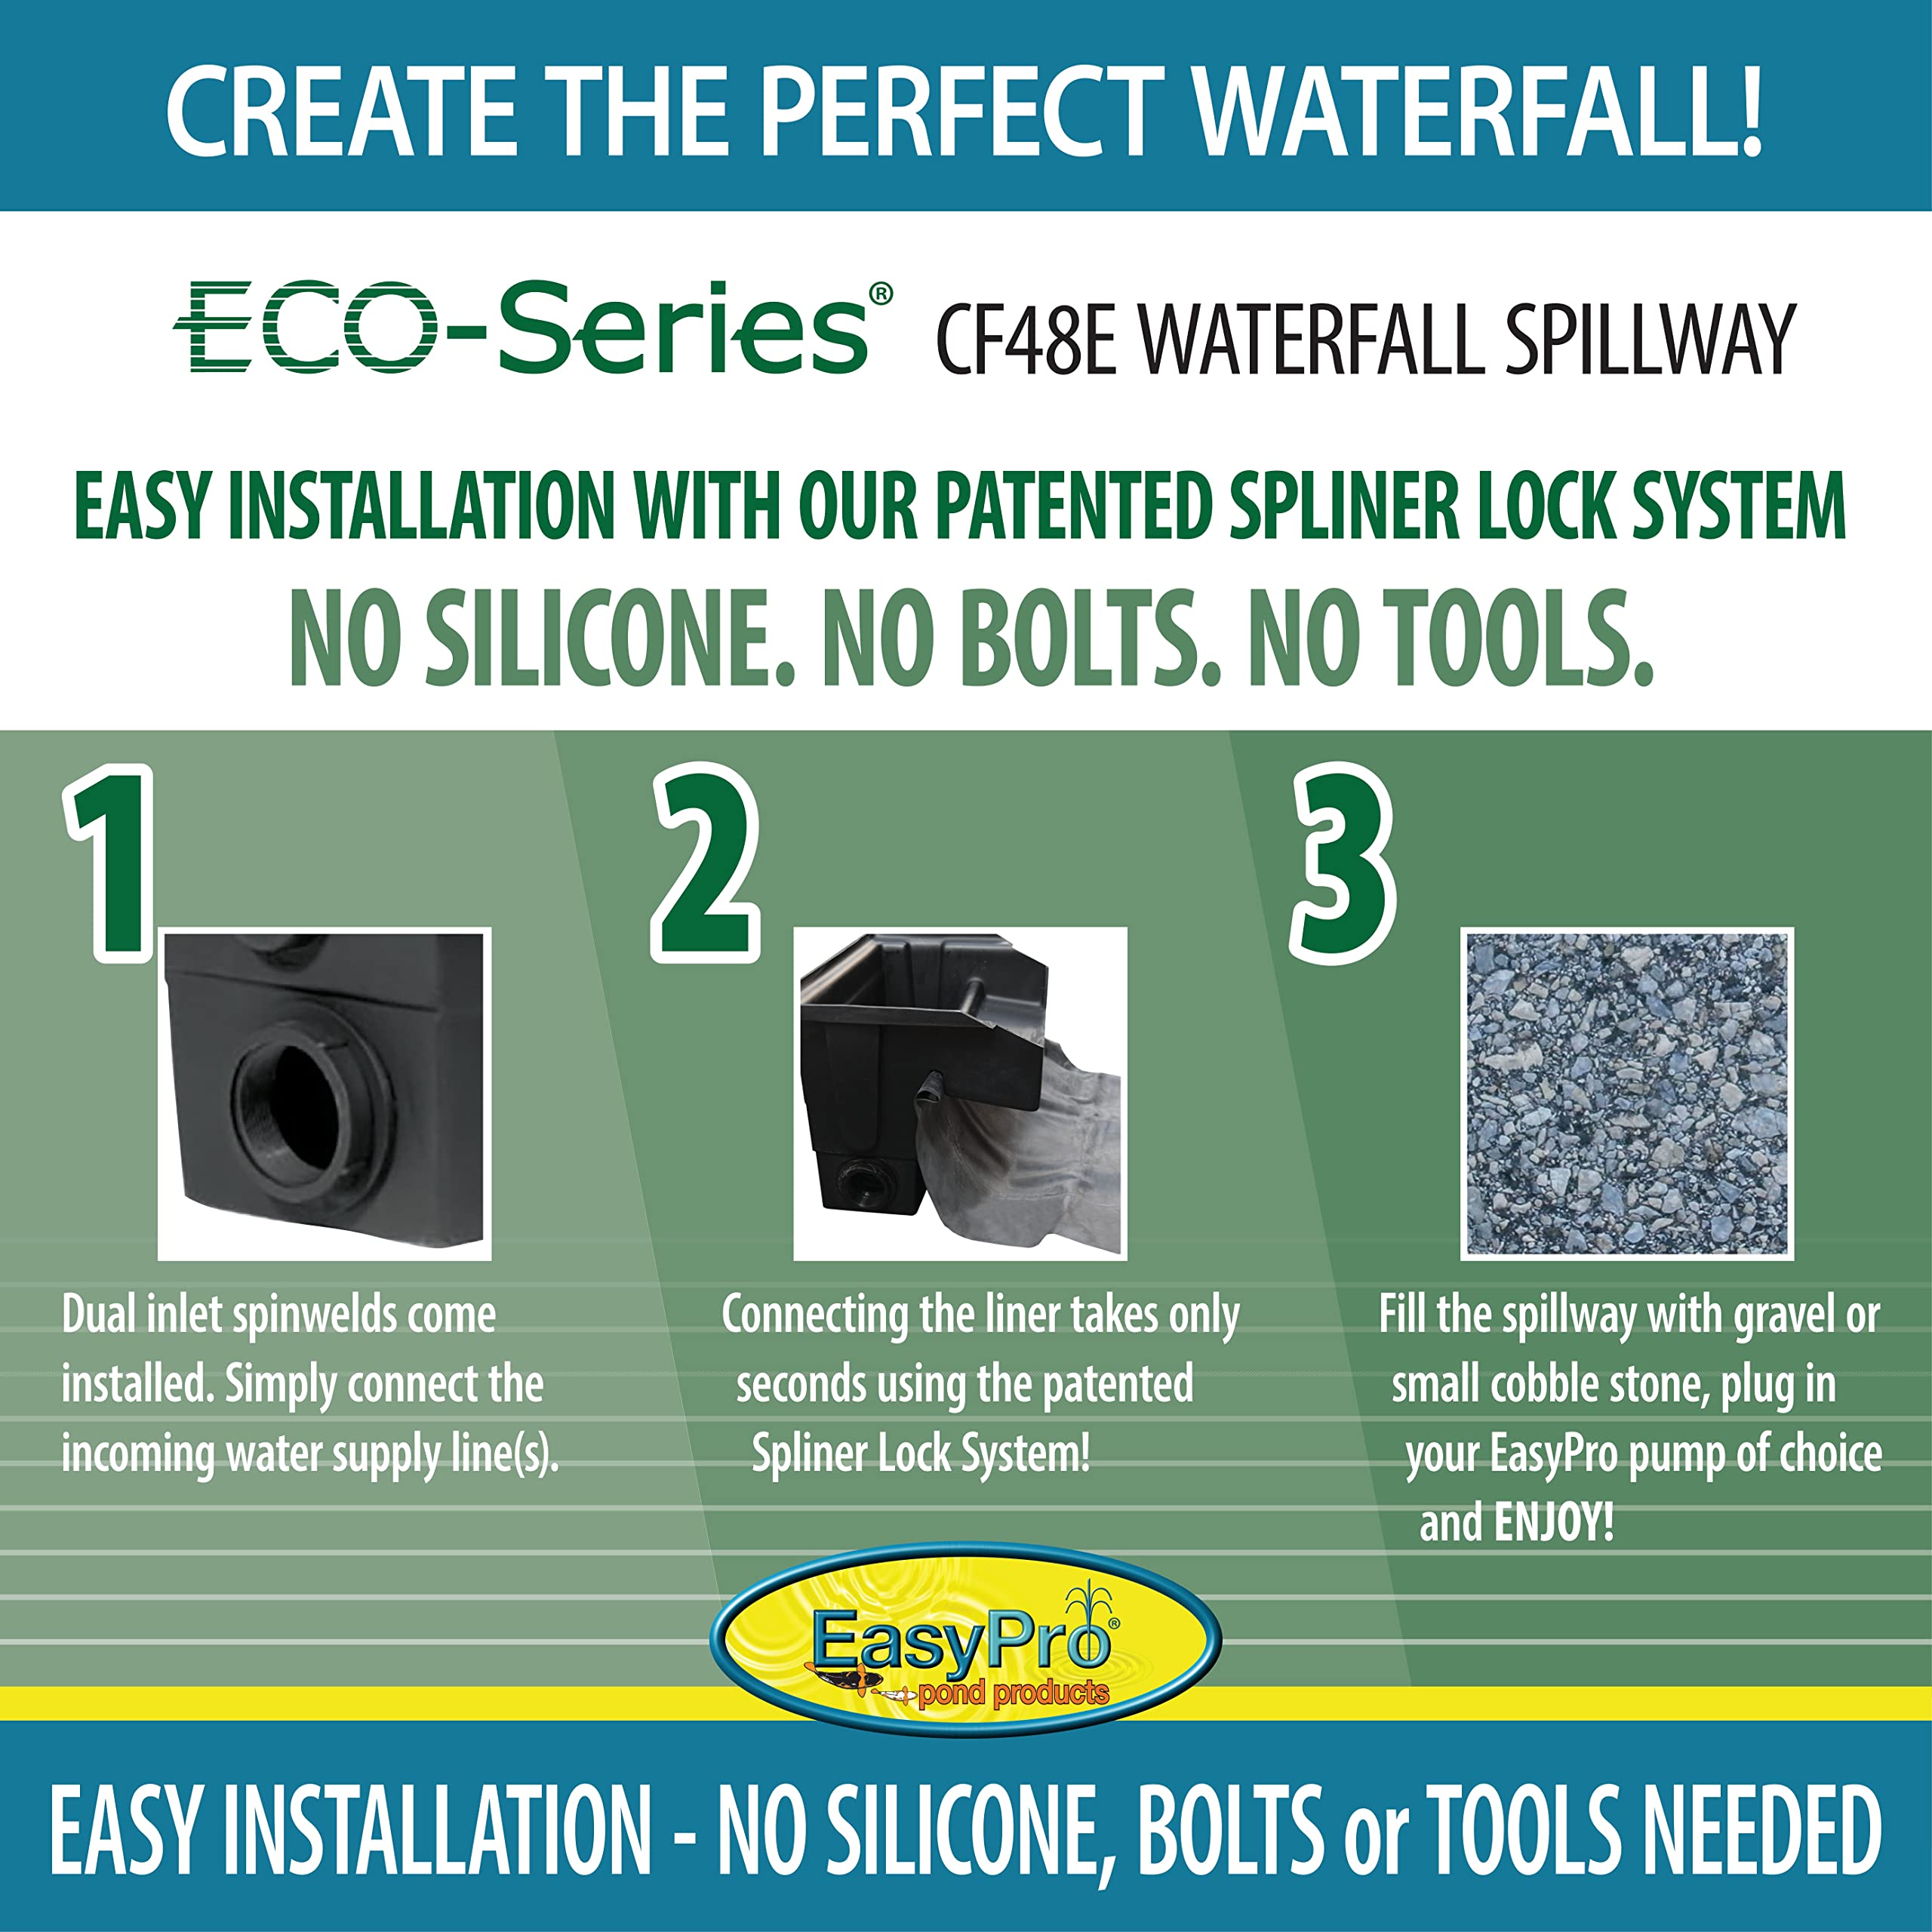 EasyPro Pond Products CF48E Eco-Series 48” Waterfall Spillway is Ideal for Just-A-Falls Water Features. Connect Liner Without Tools. 2-2” Installed Spinweld Inlets. Up to 6400 to 12000 GPH Flow